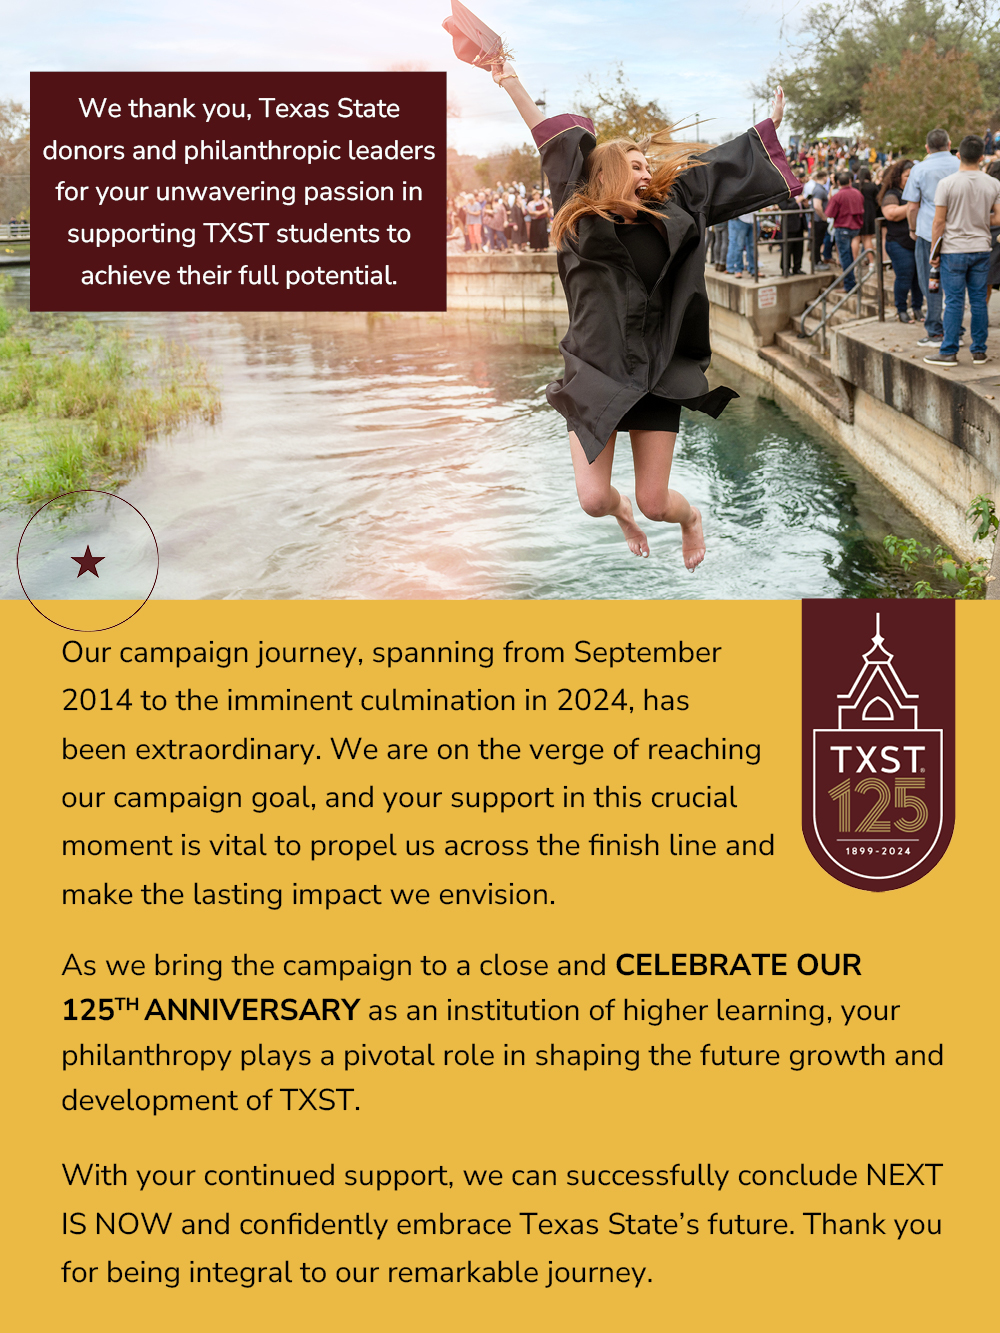 Your Impact Photo of graduate jumping in the river after her graduation. We thank you, Texas State donors and philanthropic leaders for your unwavering passion in supporting TXST students to achieve their full potential.  Our campaign journey, spanning from September 2014 to the imminent culmination in 2024, has been extraordinary. We are on the verge of reaching our campaign goal, and your support in this crucial moment is vital to propel us across the finish line and make the lasting impact we envision. Image of TXST 125th logo. As we bring the campaign to a close and celebrate our 125th anniversary as an institution of higher learning, your philanthropy plays a pivotal role in shaping the future growth and development of TXST. With your continued support, we can successfully conclude NEXT IS NOW and confidently embrace Texas State's future. Thank you for being integral to our remarkable journey.-Image 9b